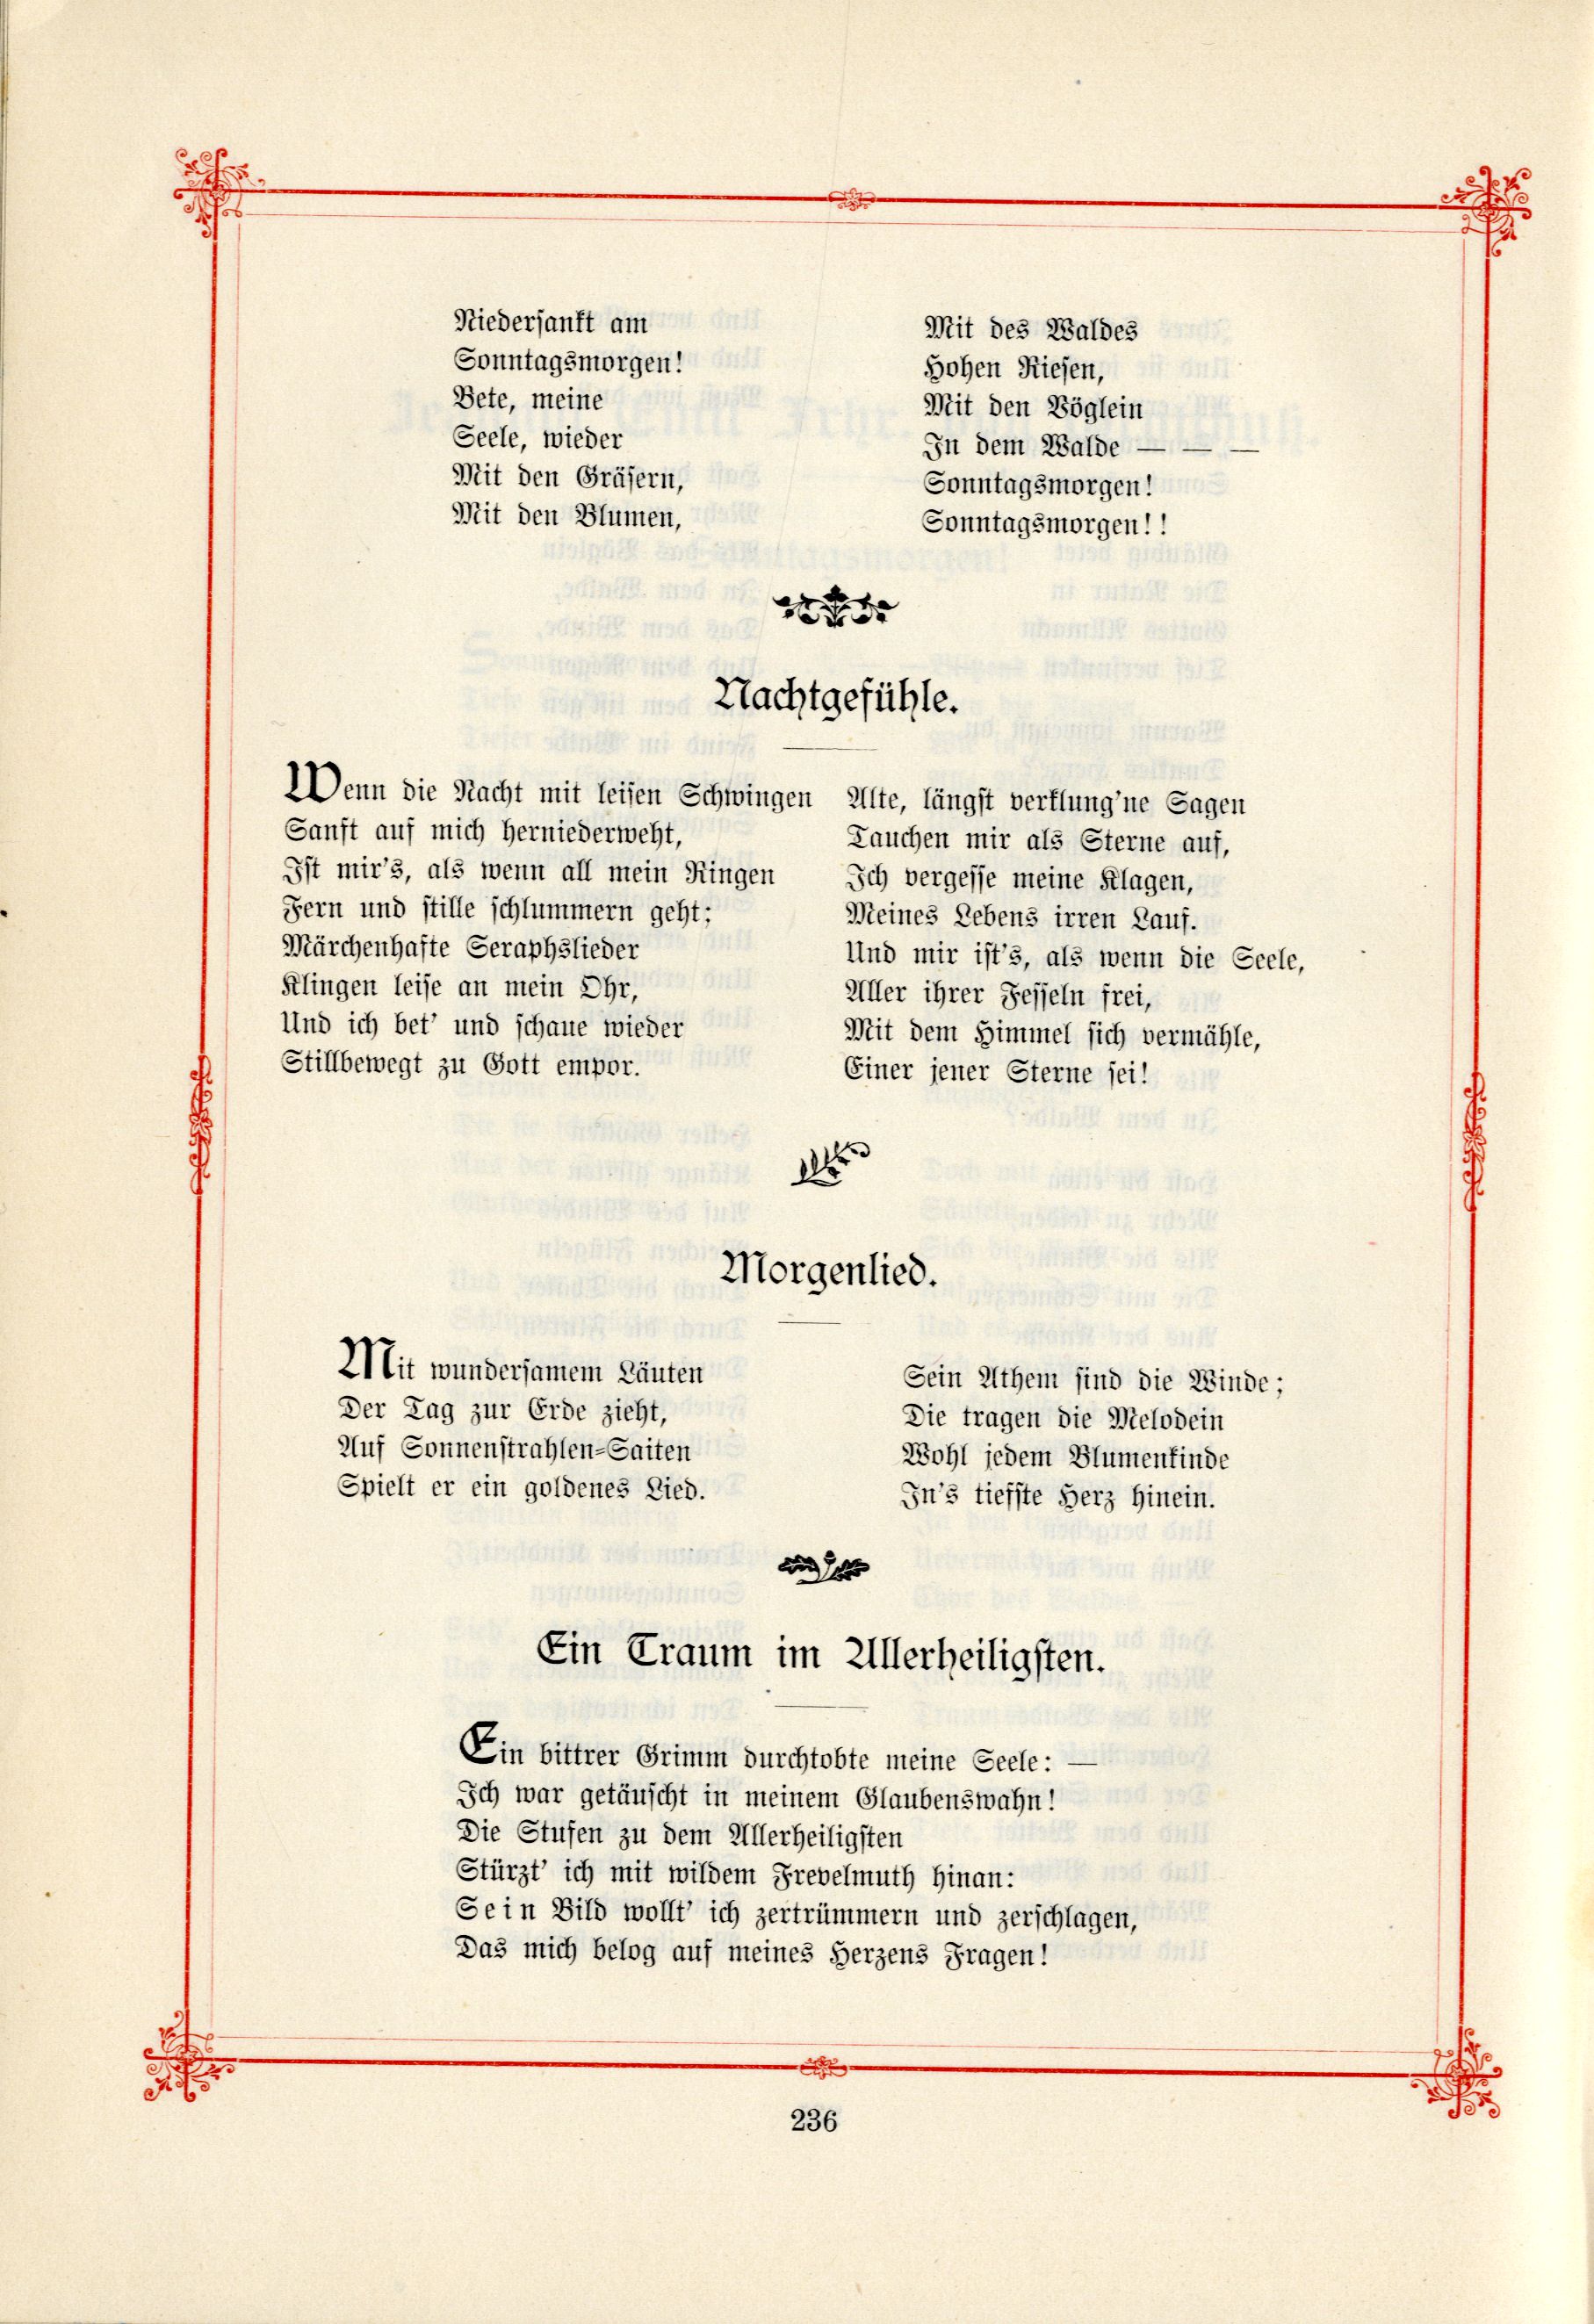 Morgenlied (1895) | 1. (236) Main body of text